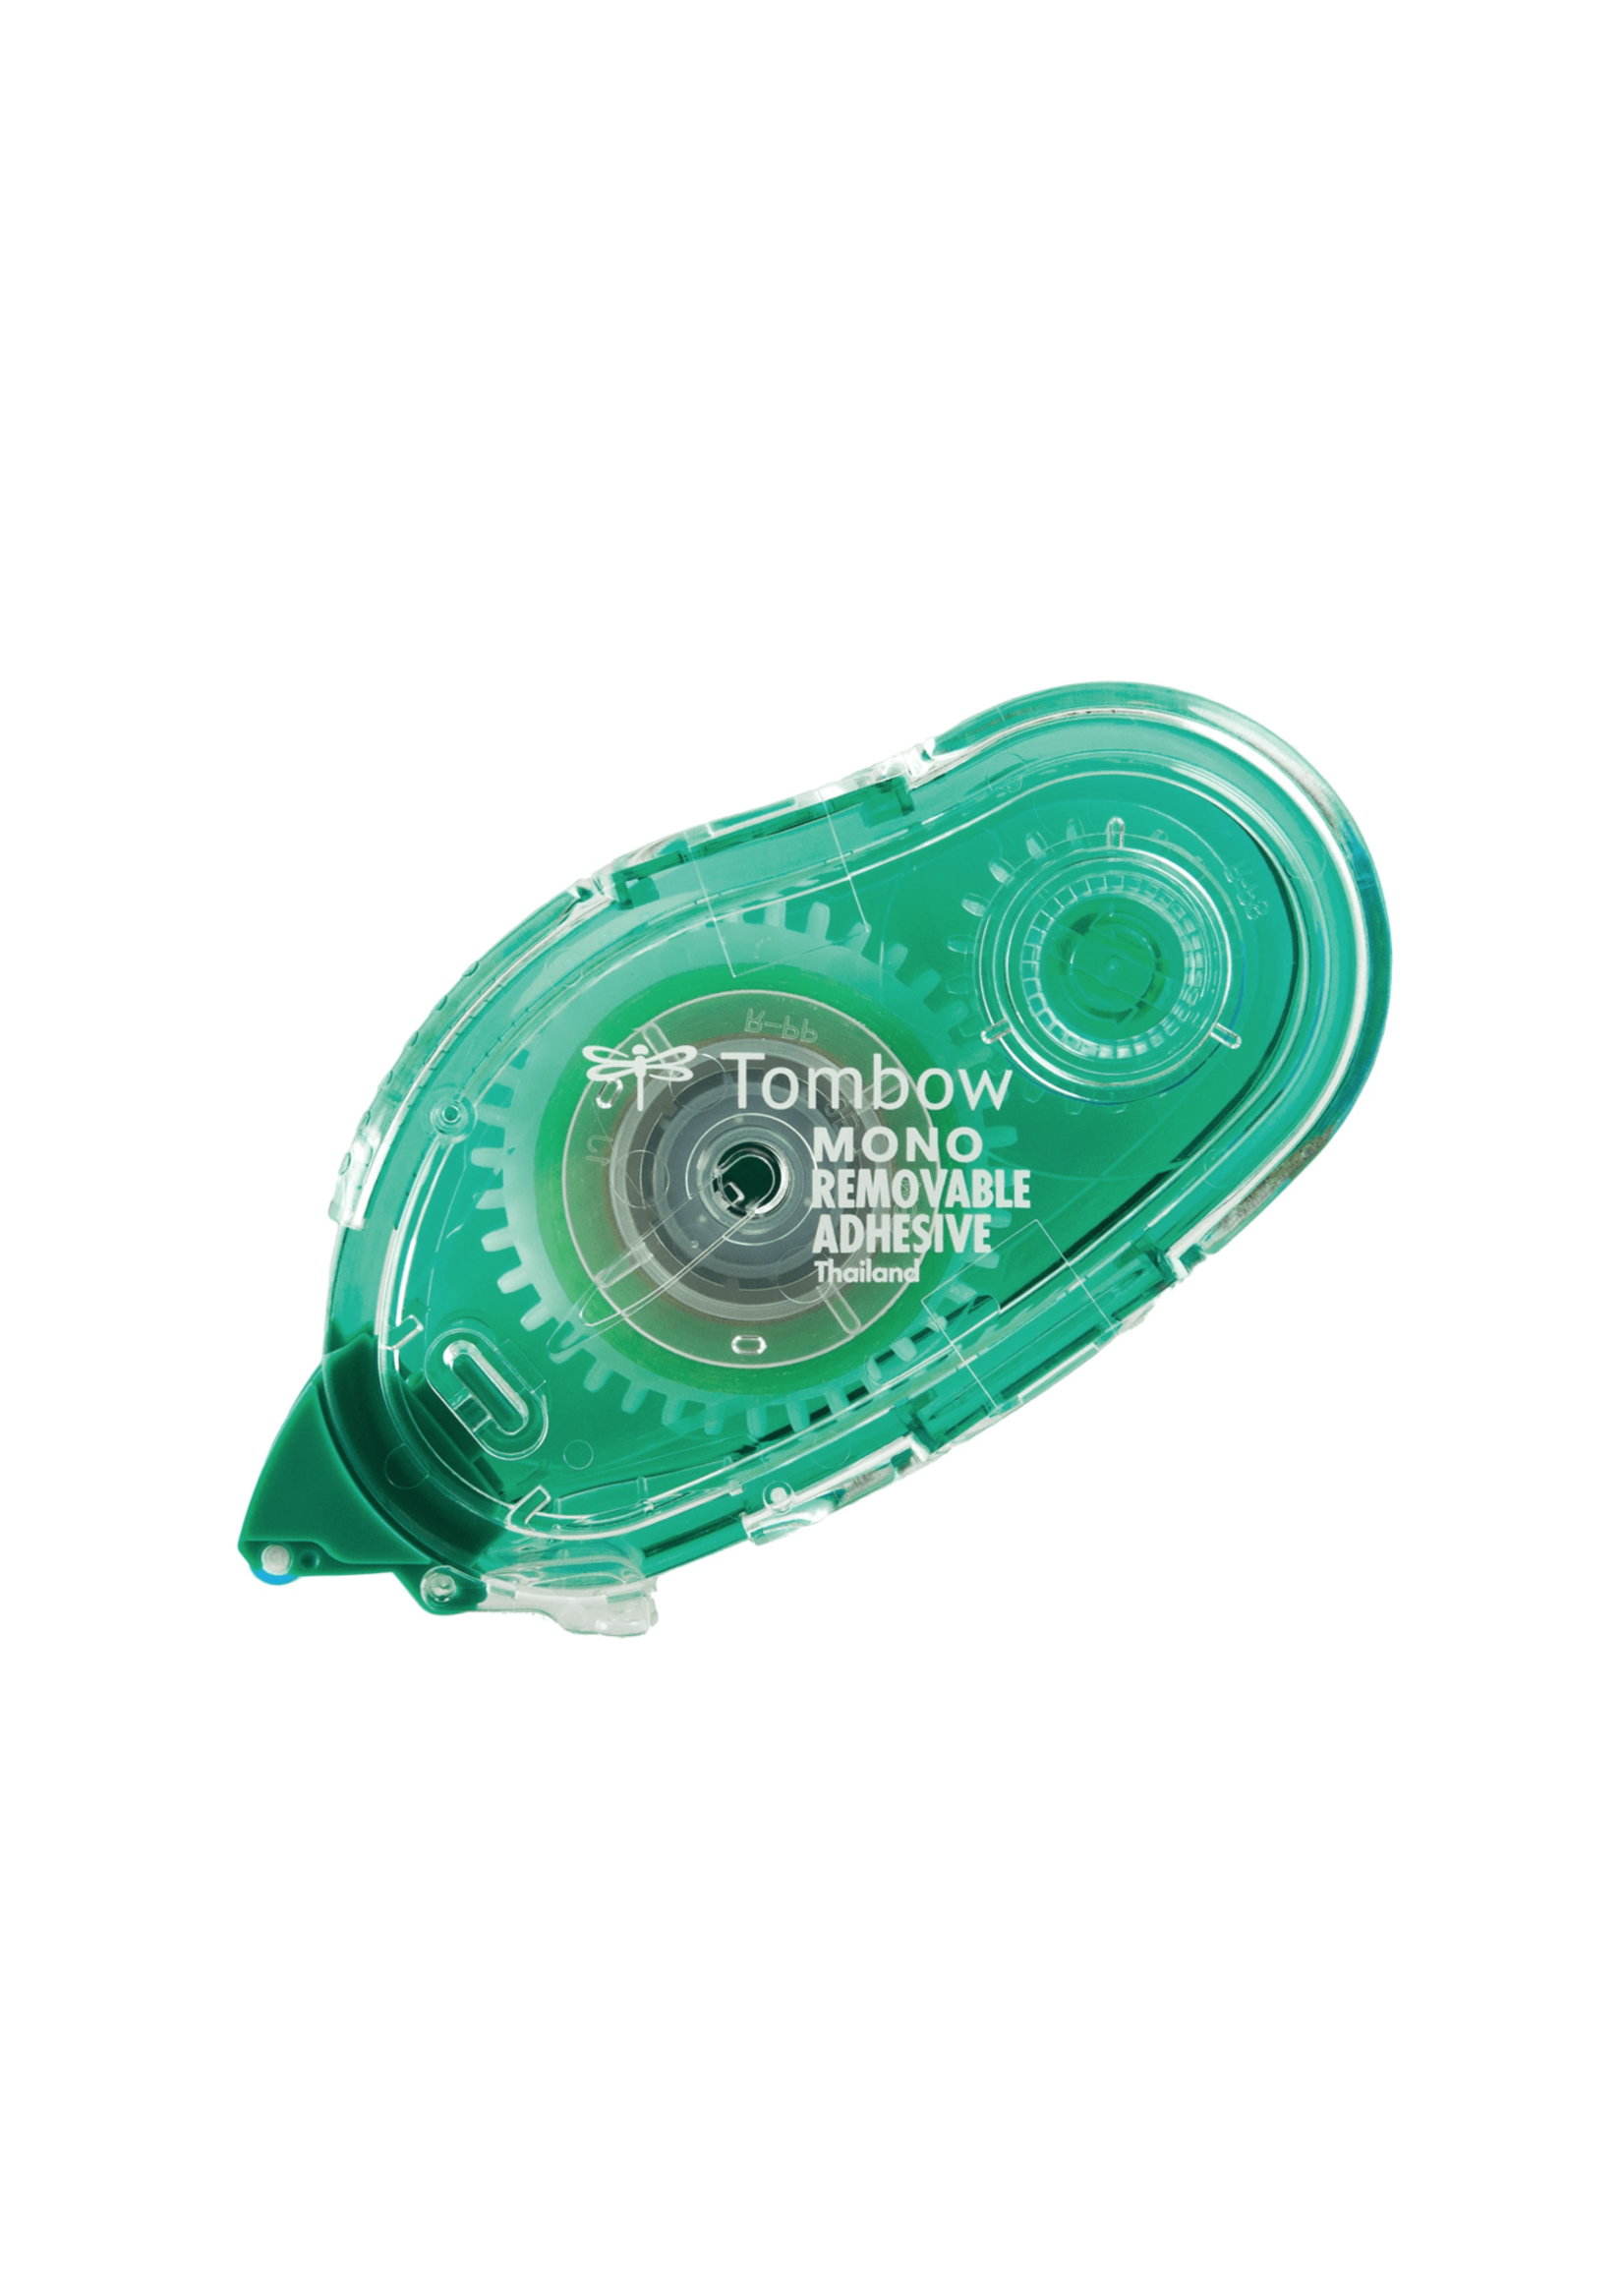 tombow Mono Removable Adhesive Dispenser